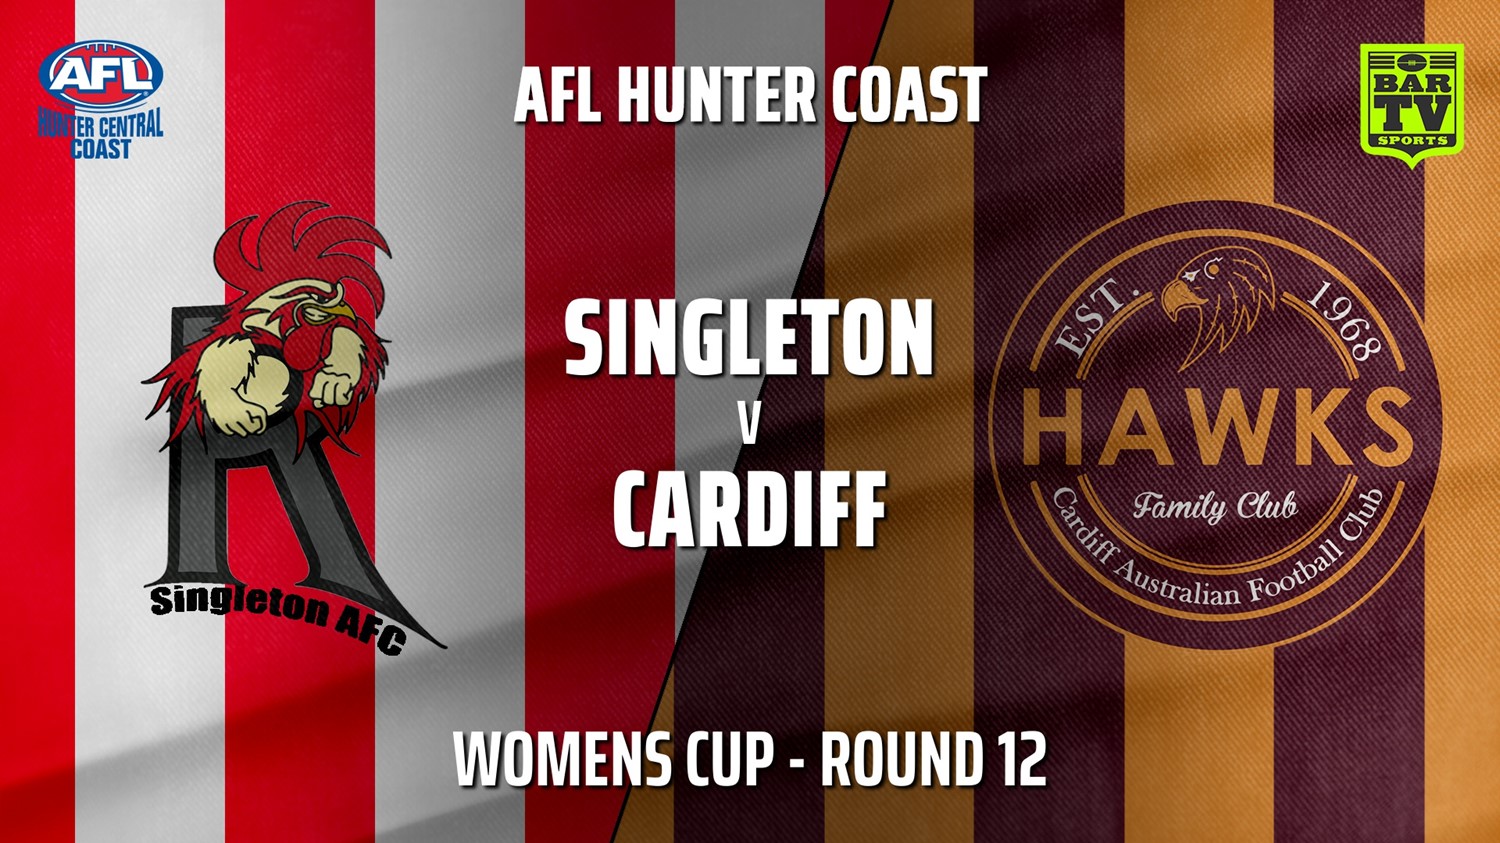 210710-AFL Hunter Central Coast Round 12 - Womens Cup - Singleton Roosters v Cardiff Hawks Slate Image